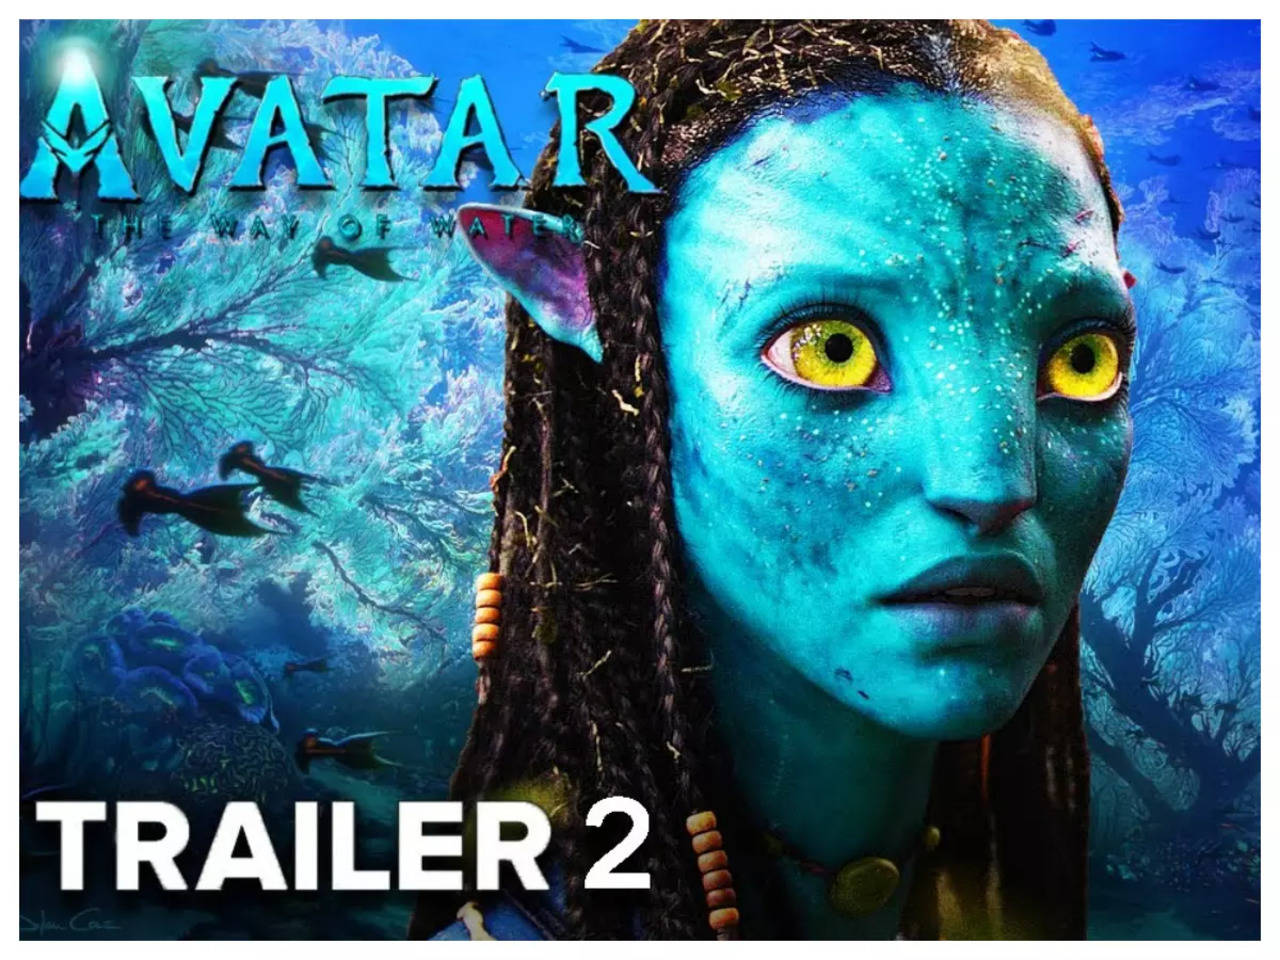 On fans demand, Avatar 2 to be also dubbed in Kannada Malayalam Movie News